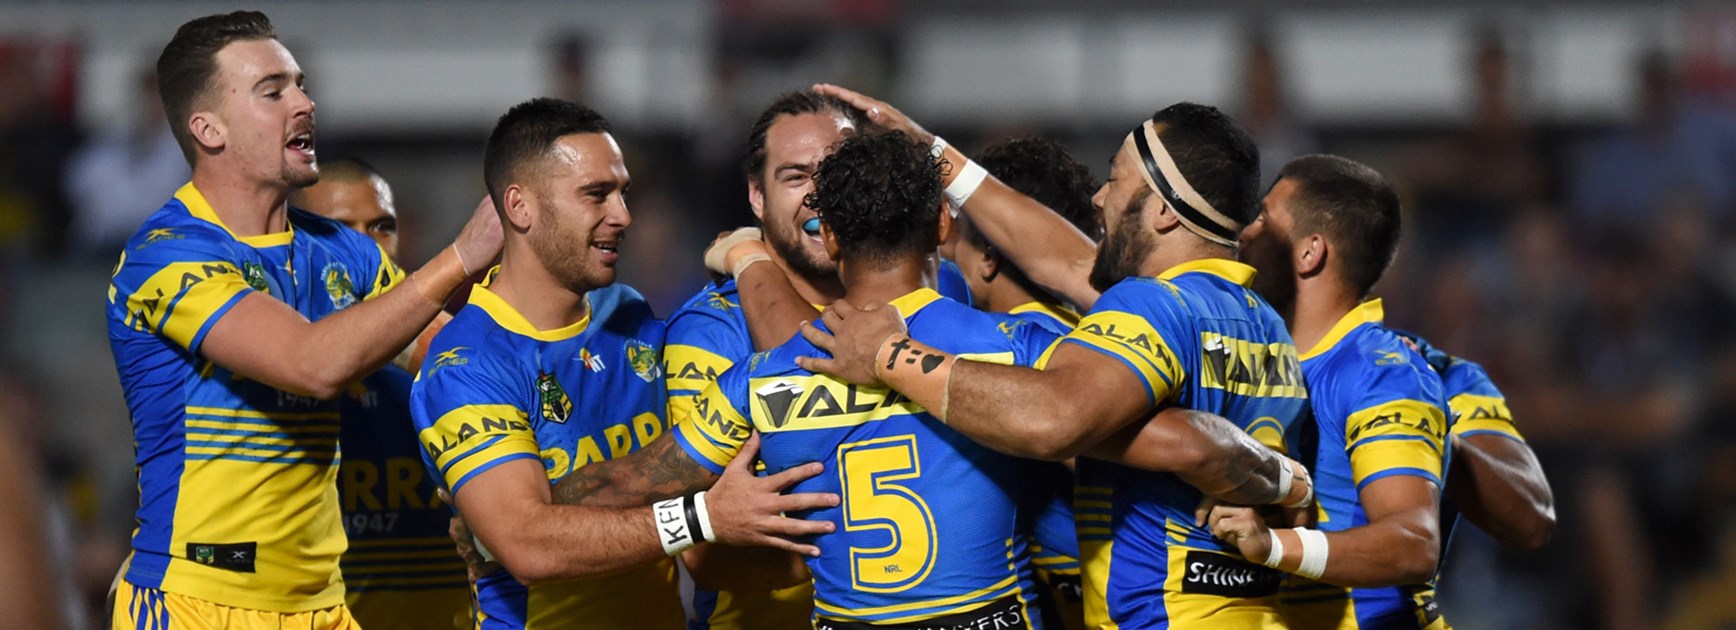 The Eels were superb against North Queensland on Friday night.